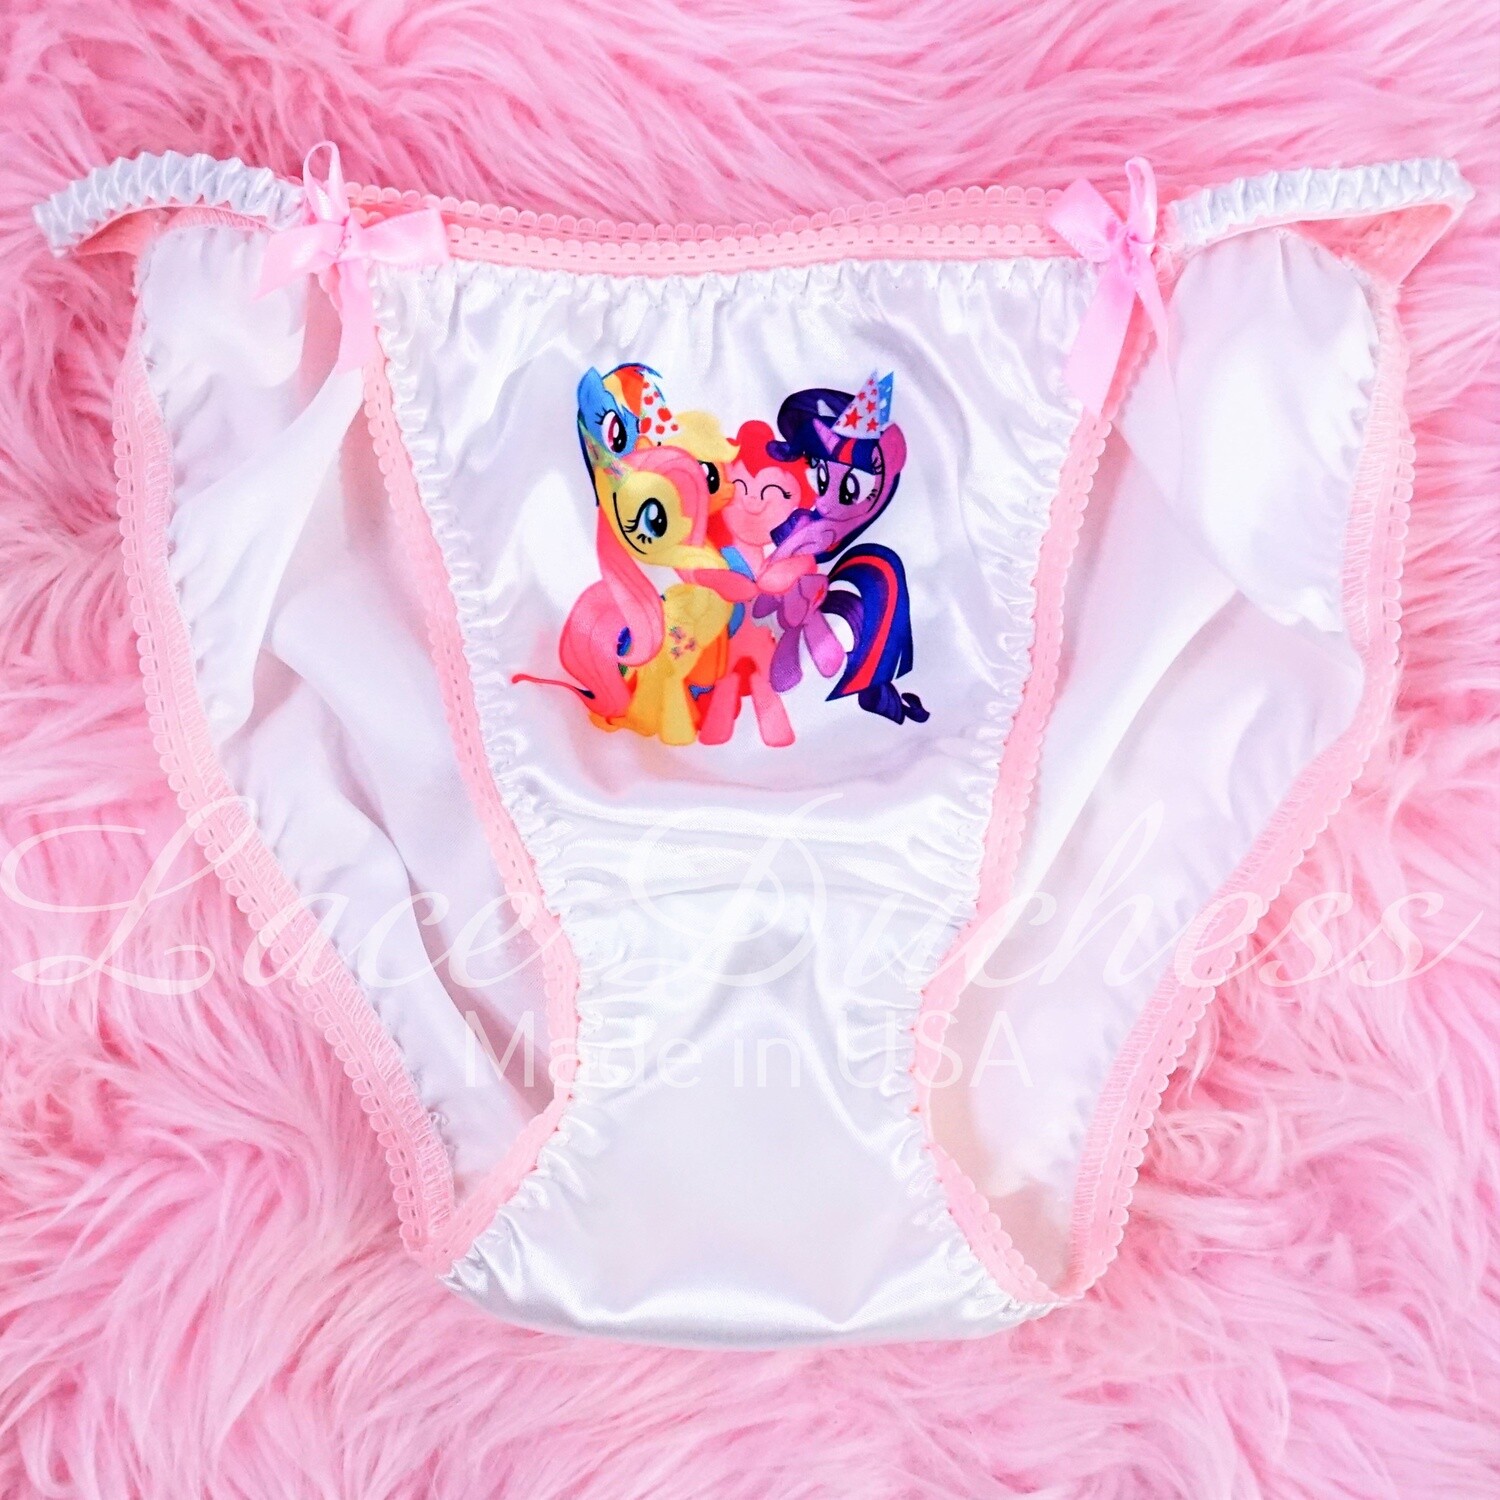 Lace Duchess Classic 80's cut My Little Pony Birthday Party Character print satin wet look panties sz 5 6 7 8